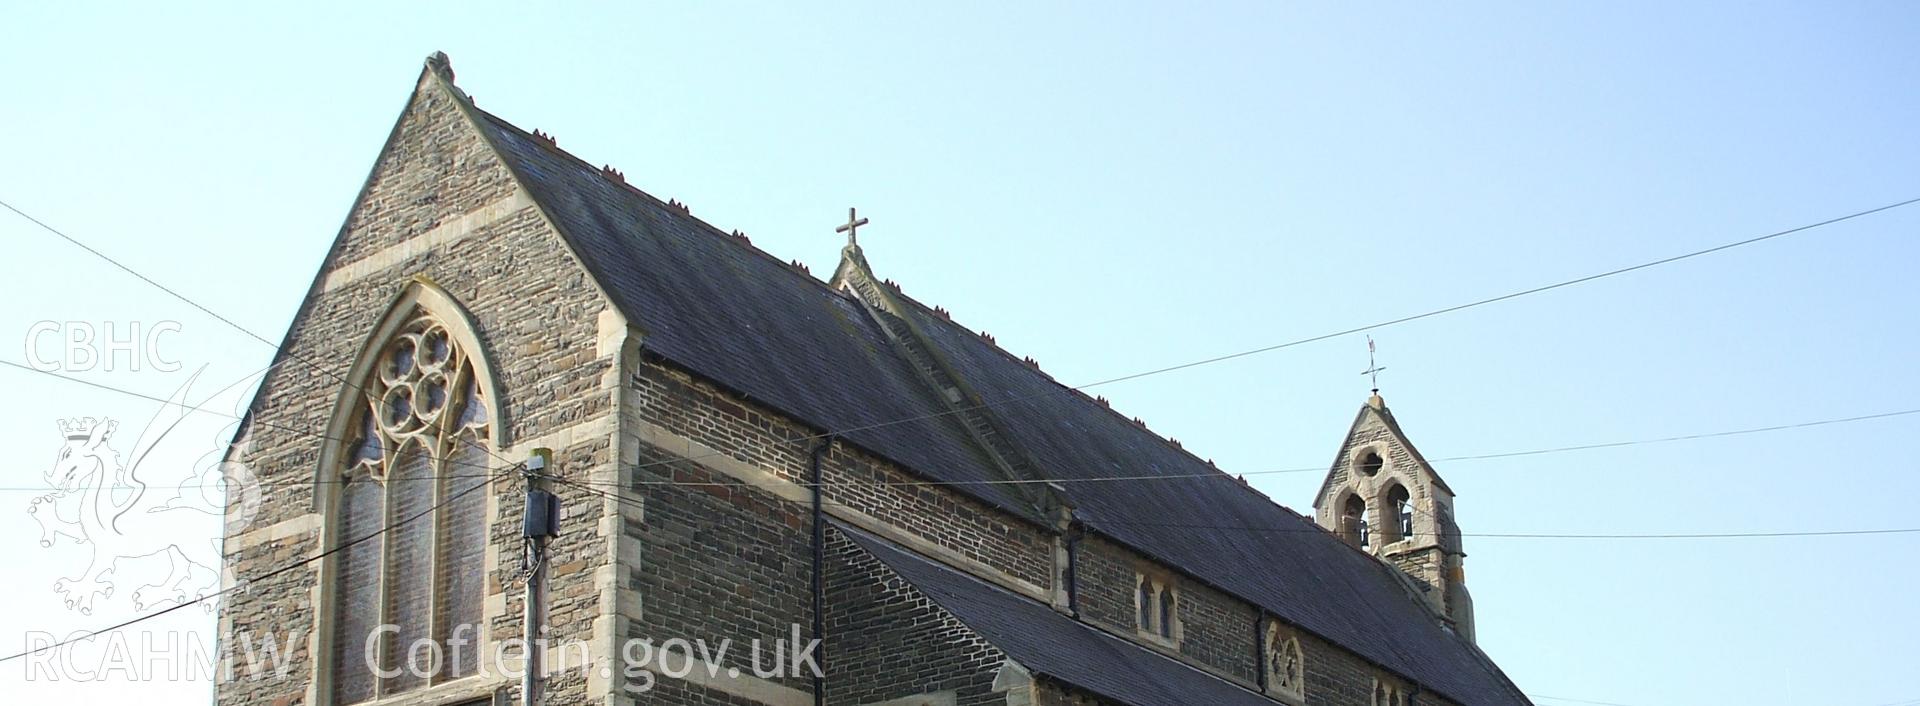 Colour digital photograph showing part of the exterior of St. Mary's Church, Aberystwyth.